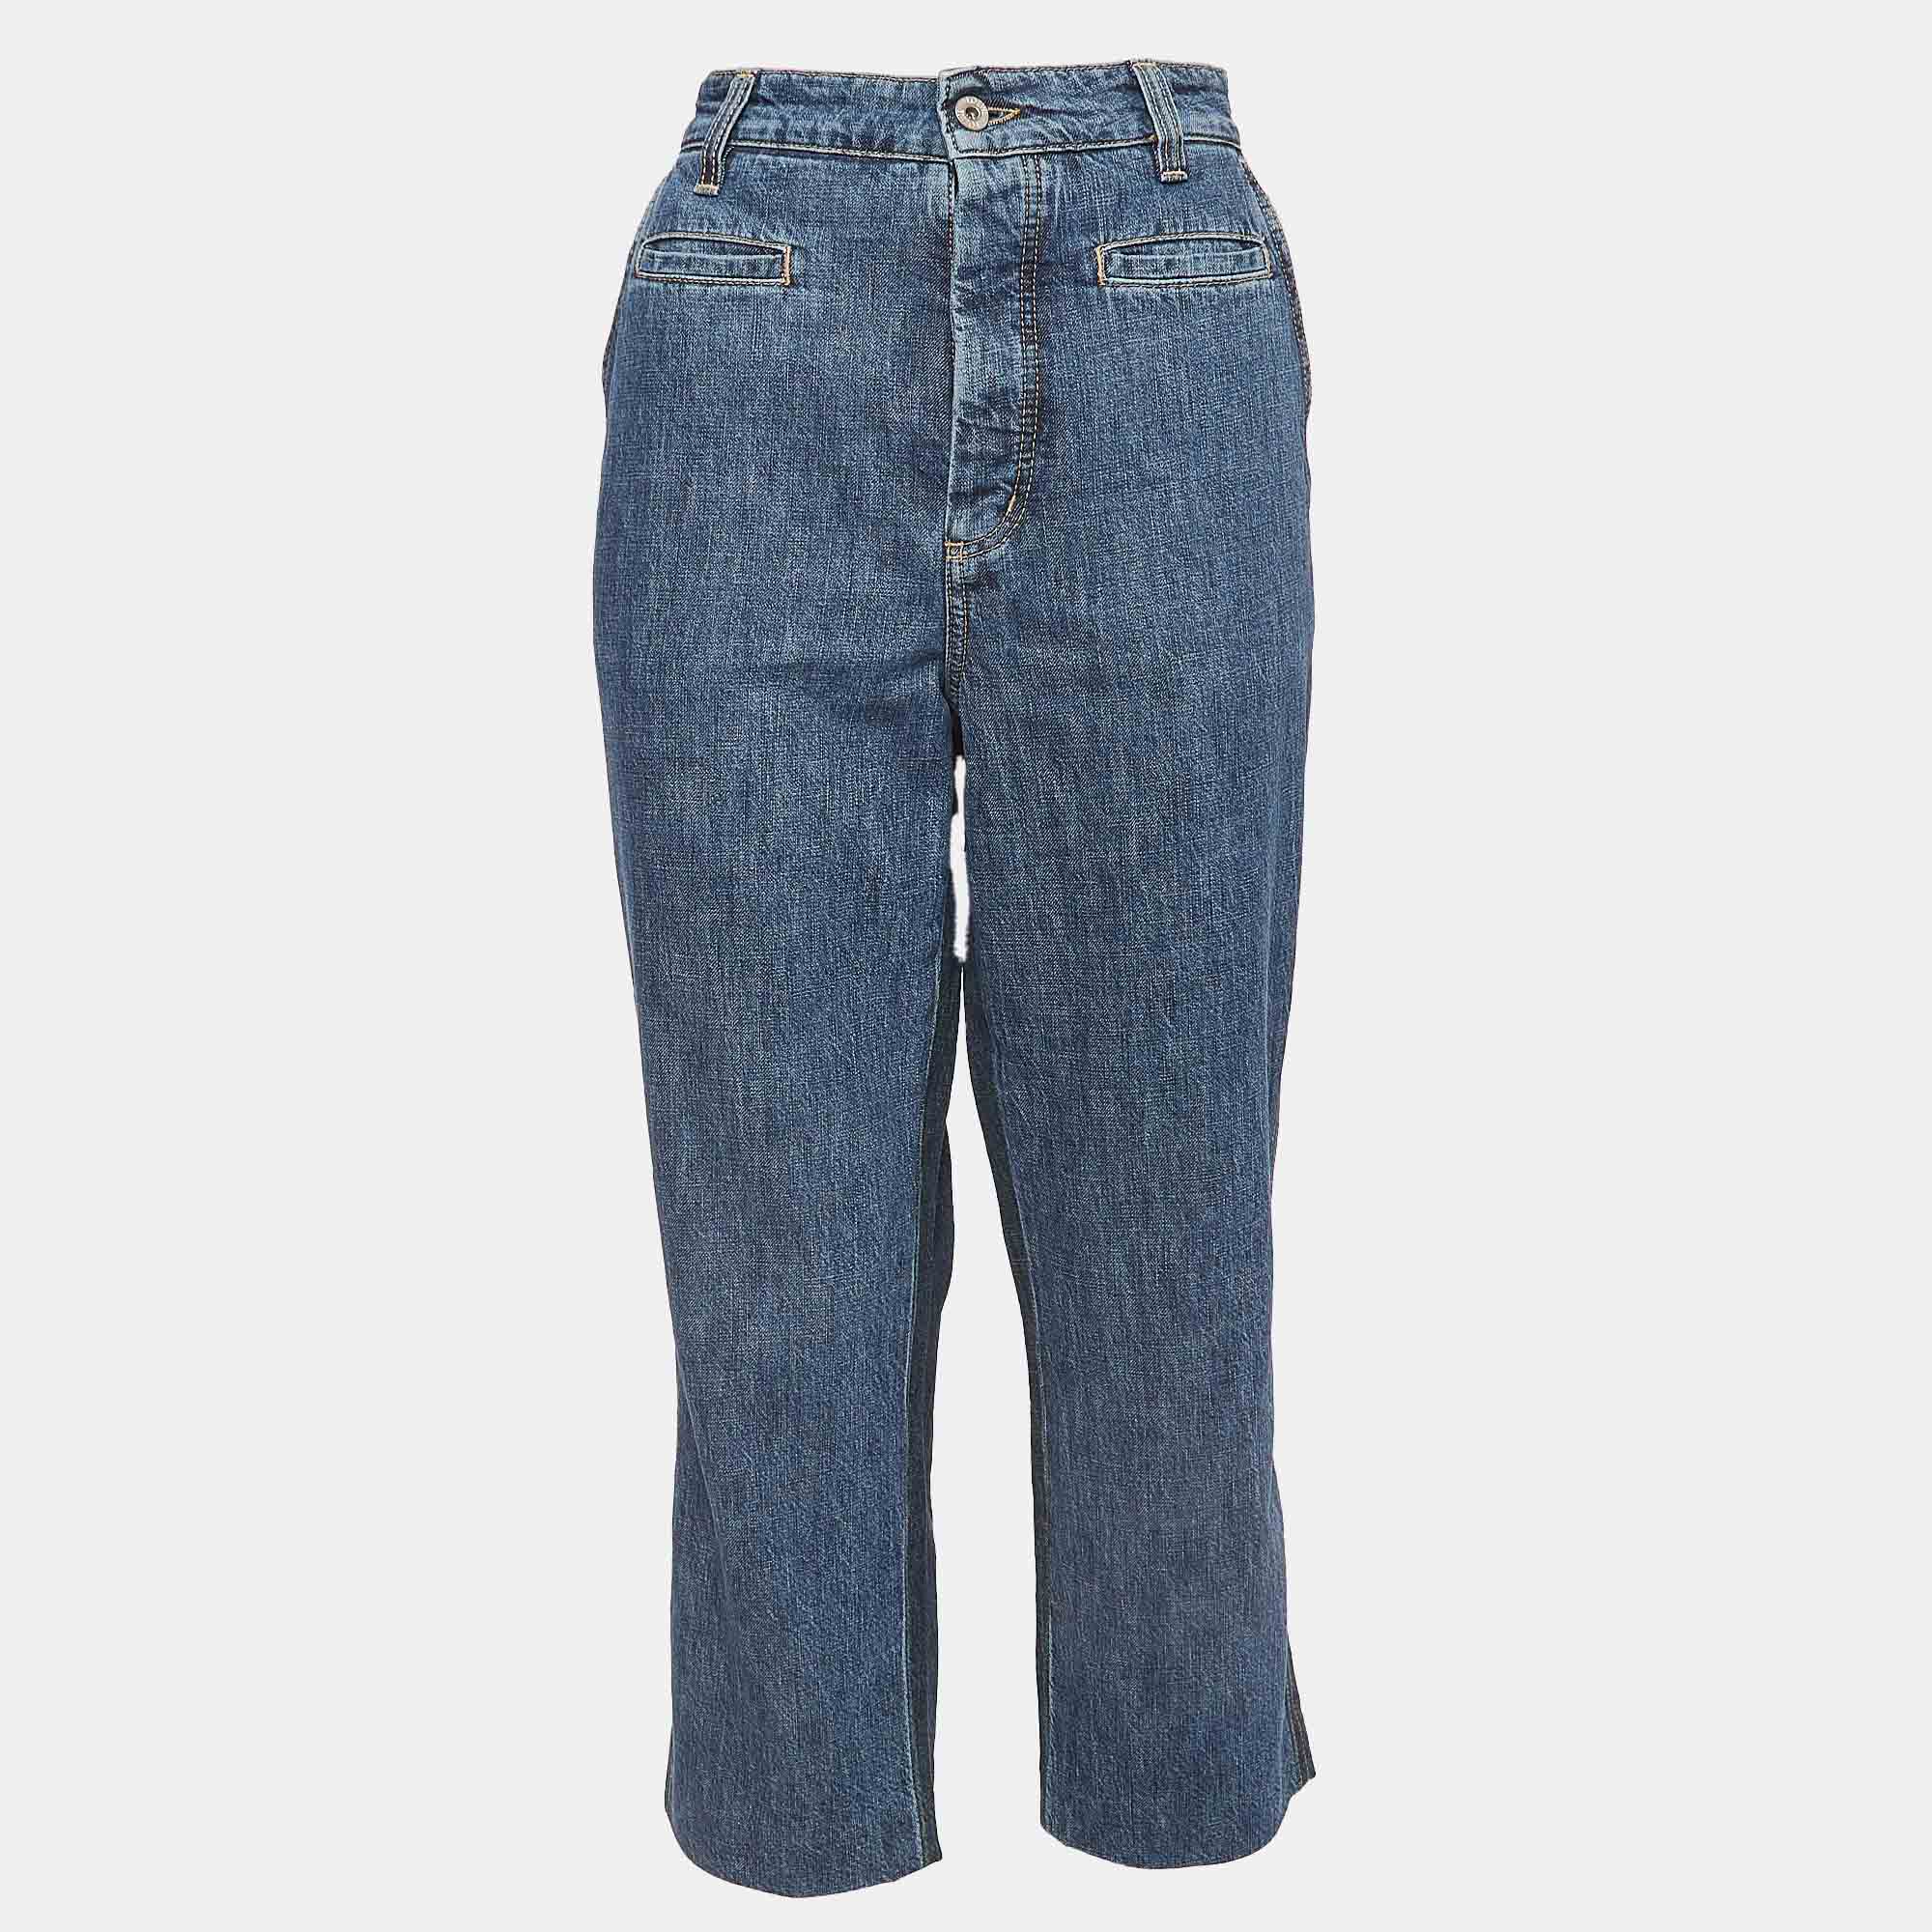 

Loewe Blue Washed Denim Buttoned Jeans  Waist 30